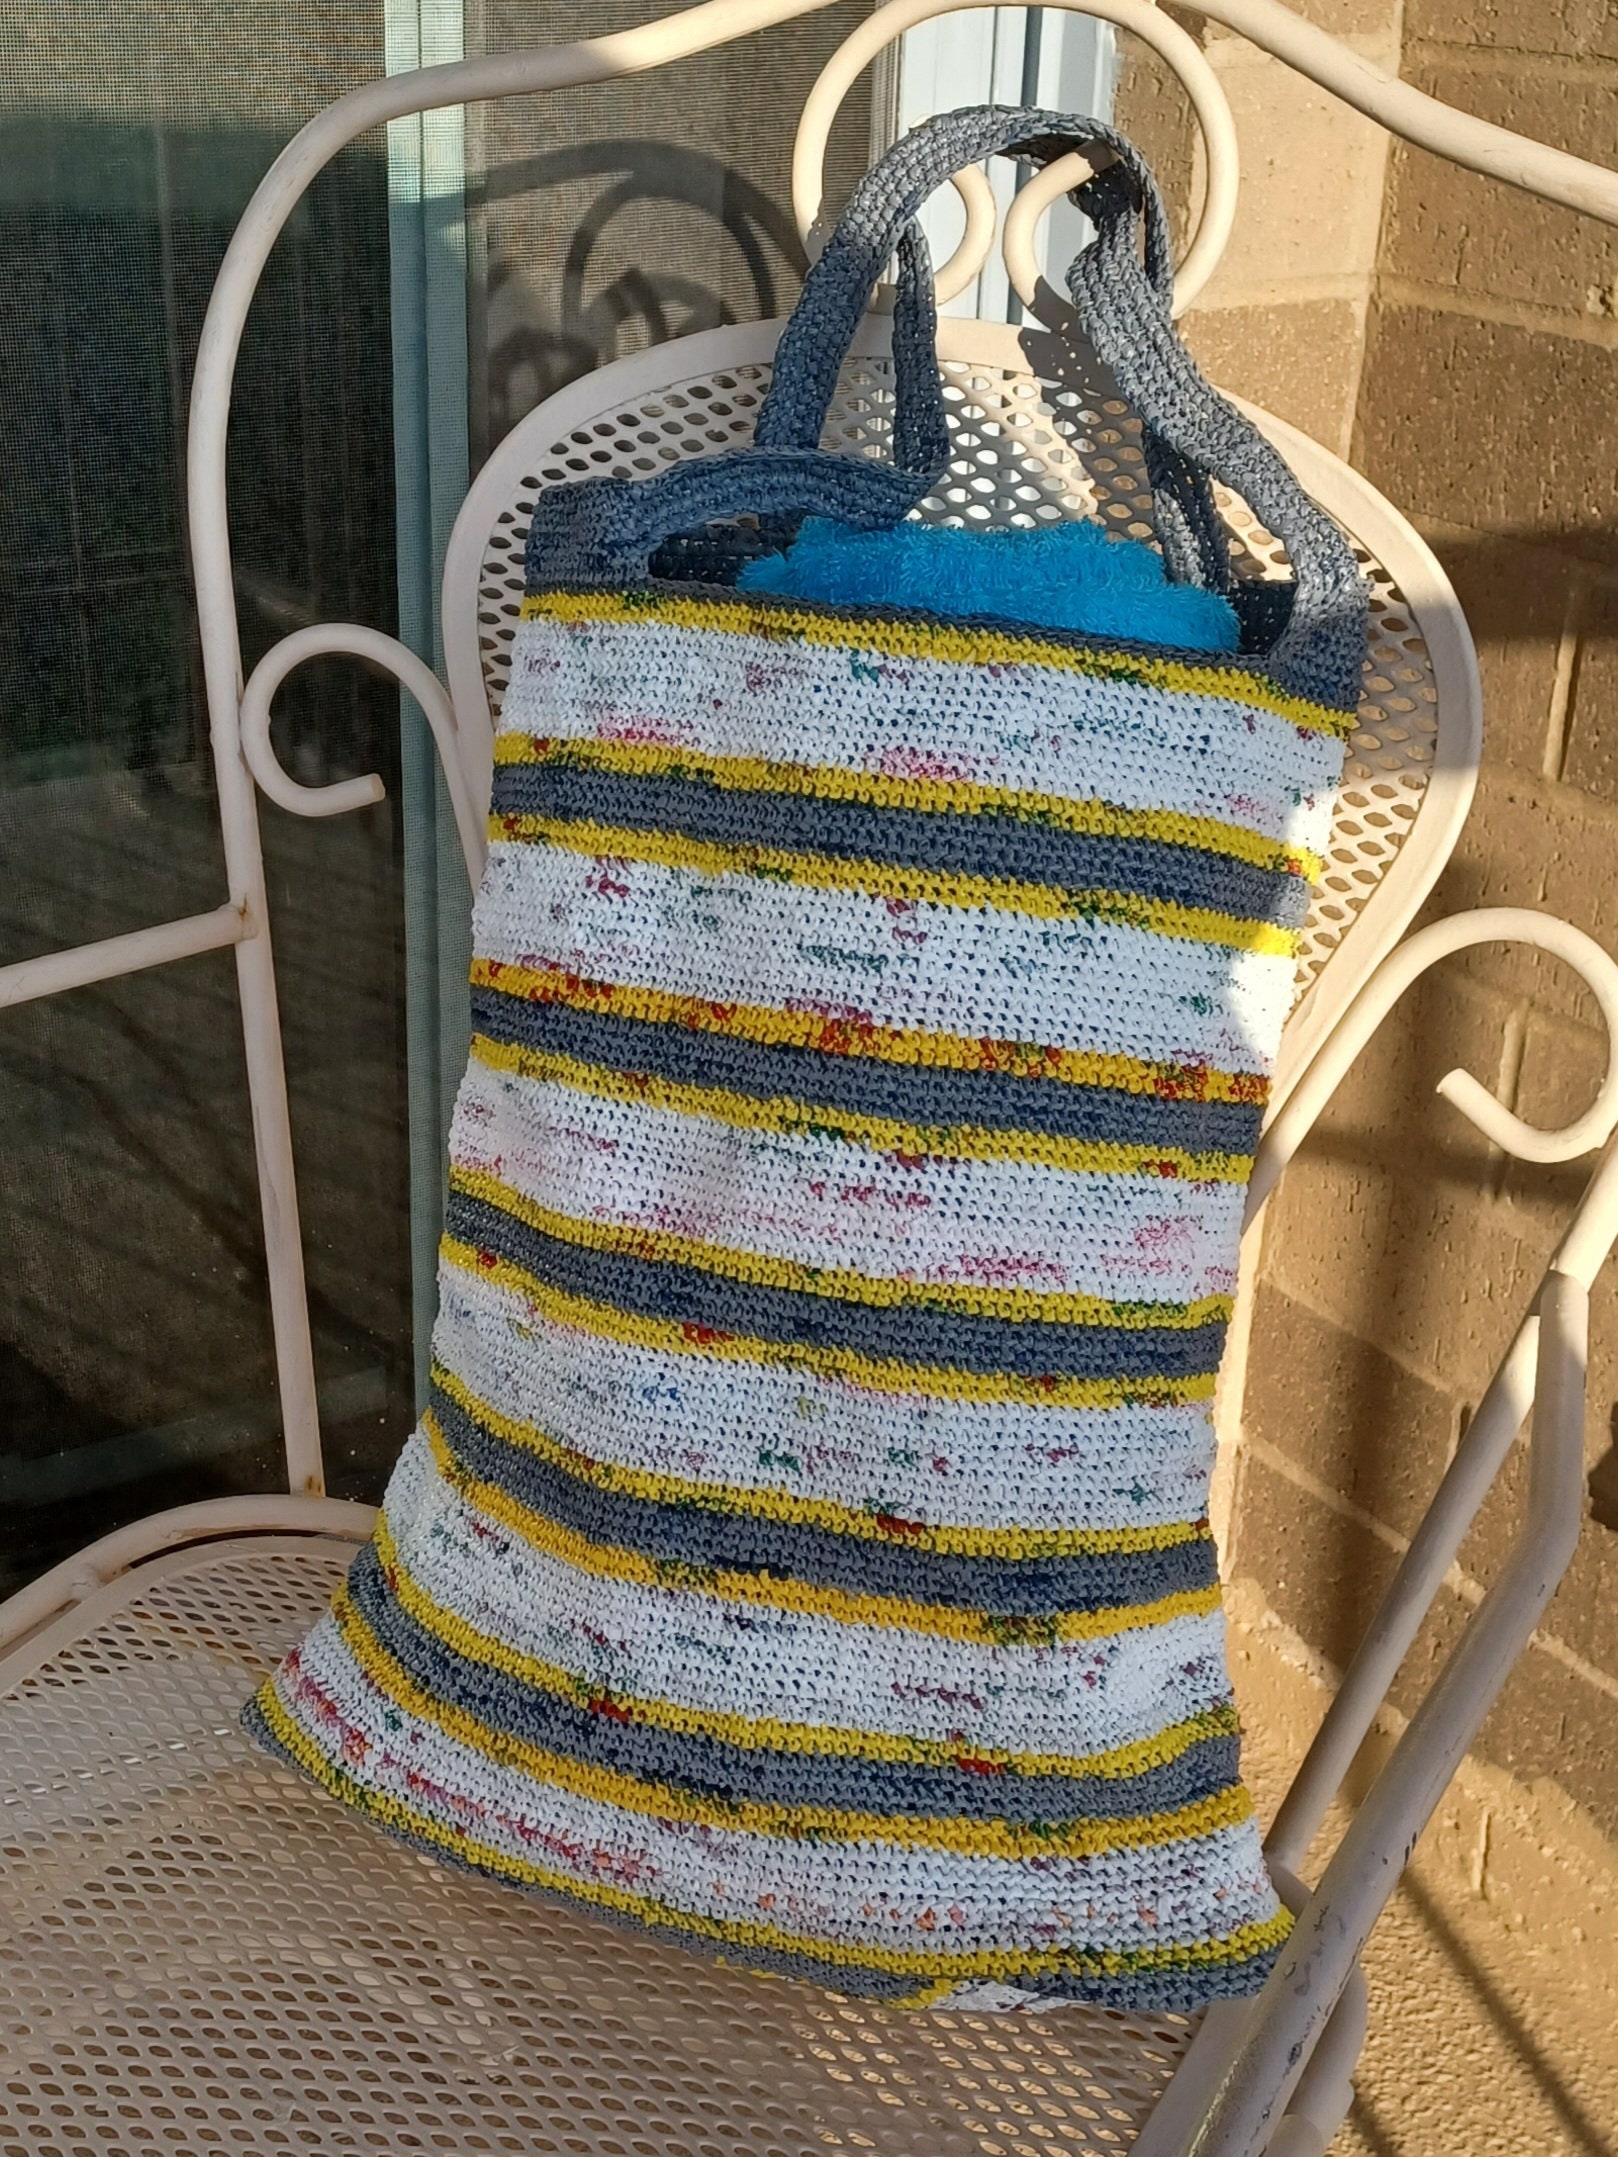 How to Make a Crochet Tote Bag Out of Plastic Grocery Bags - Brightly